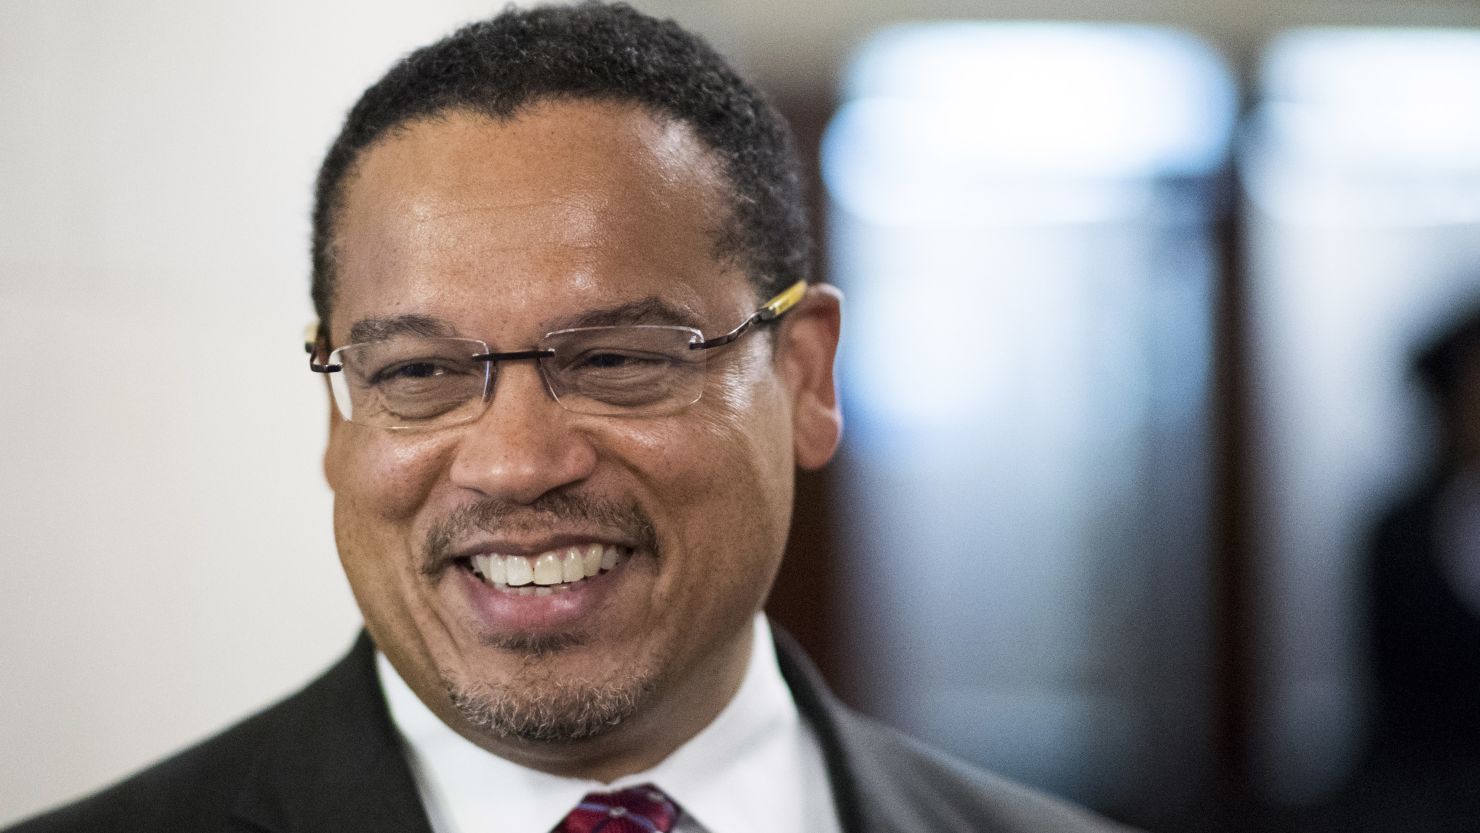 Keith Ellison on DNC race: 'I was in it to win it. I wasn't in it to make a point.'